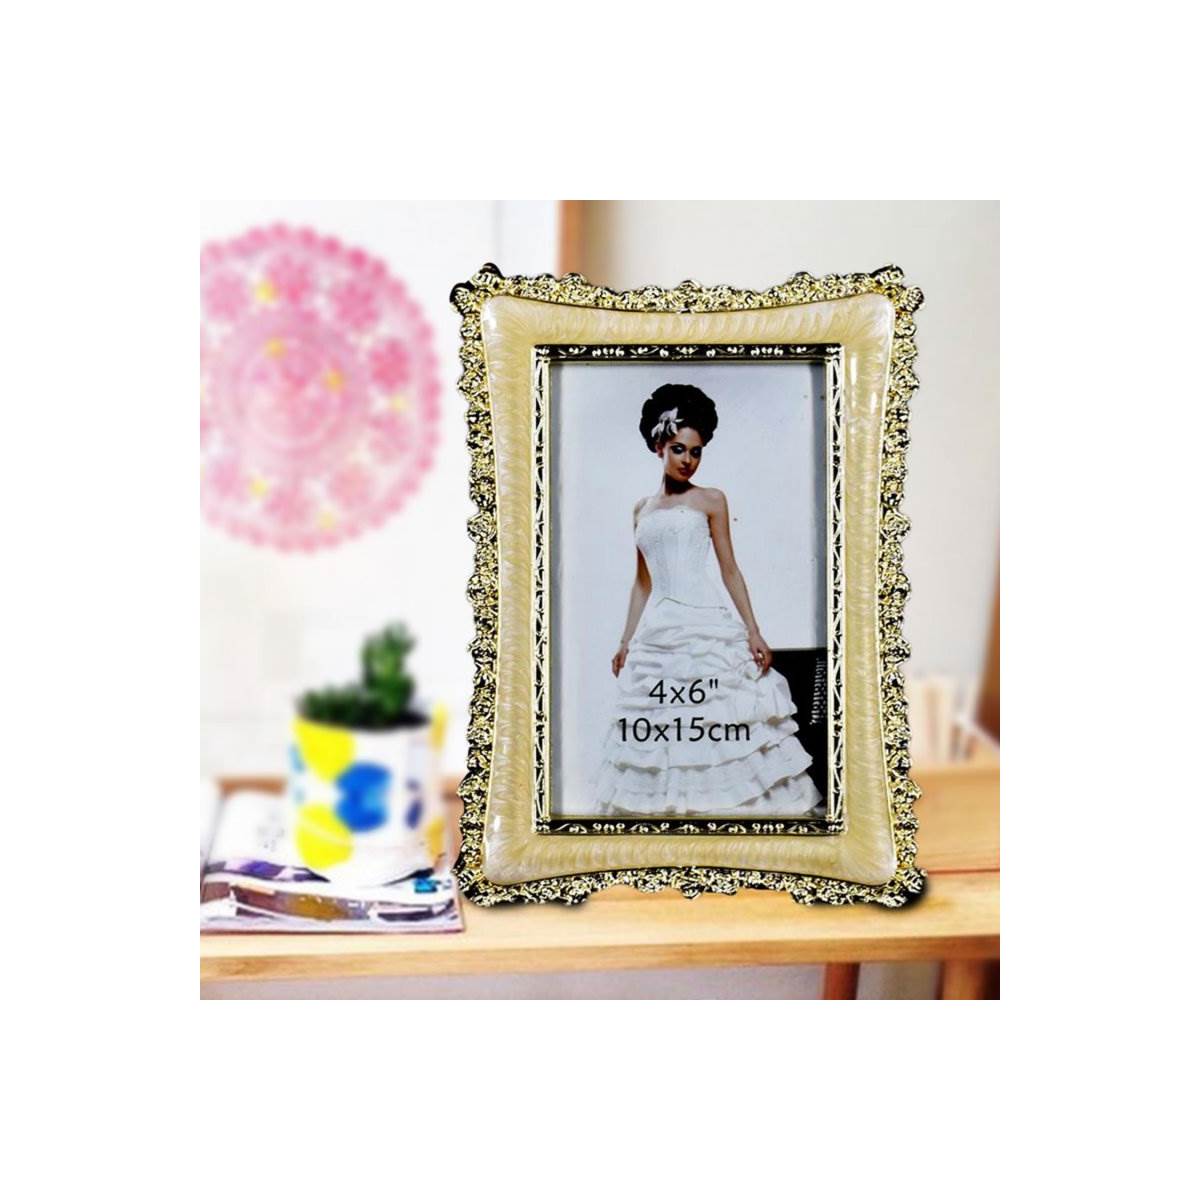 Acrylic Gold textured Photo Frame (4x6) inches (3041-46)